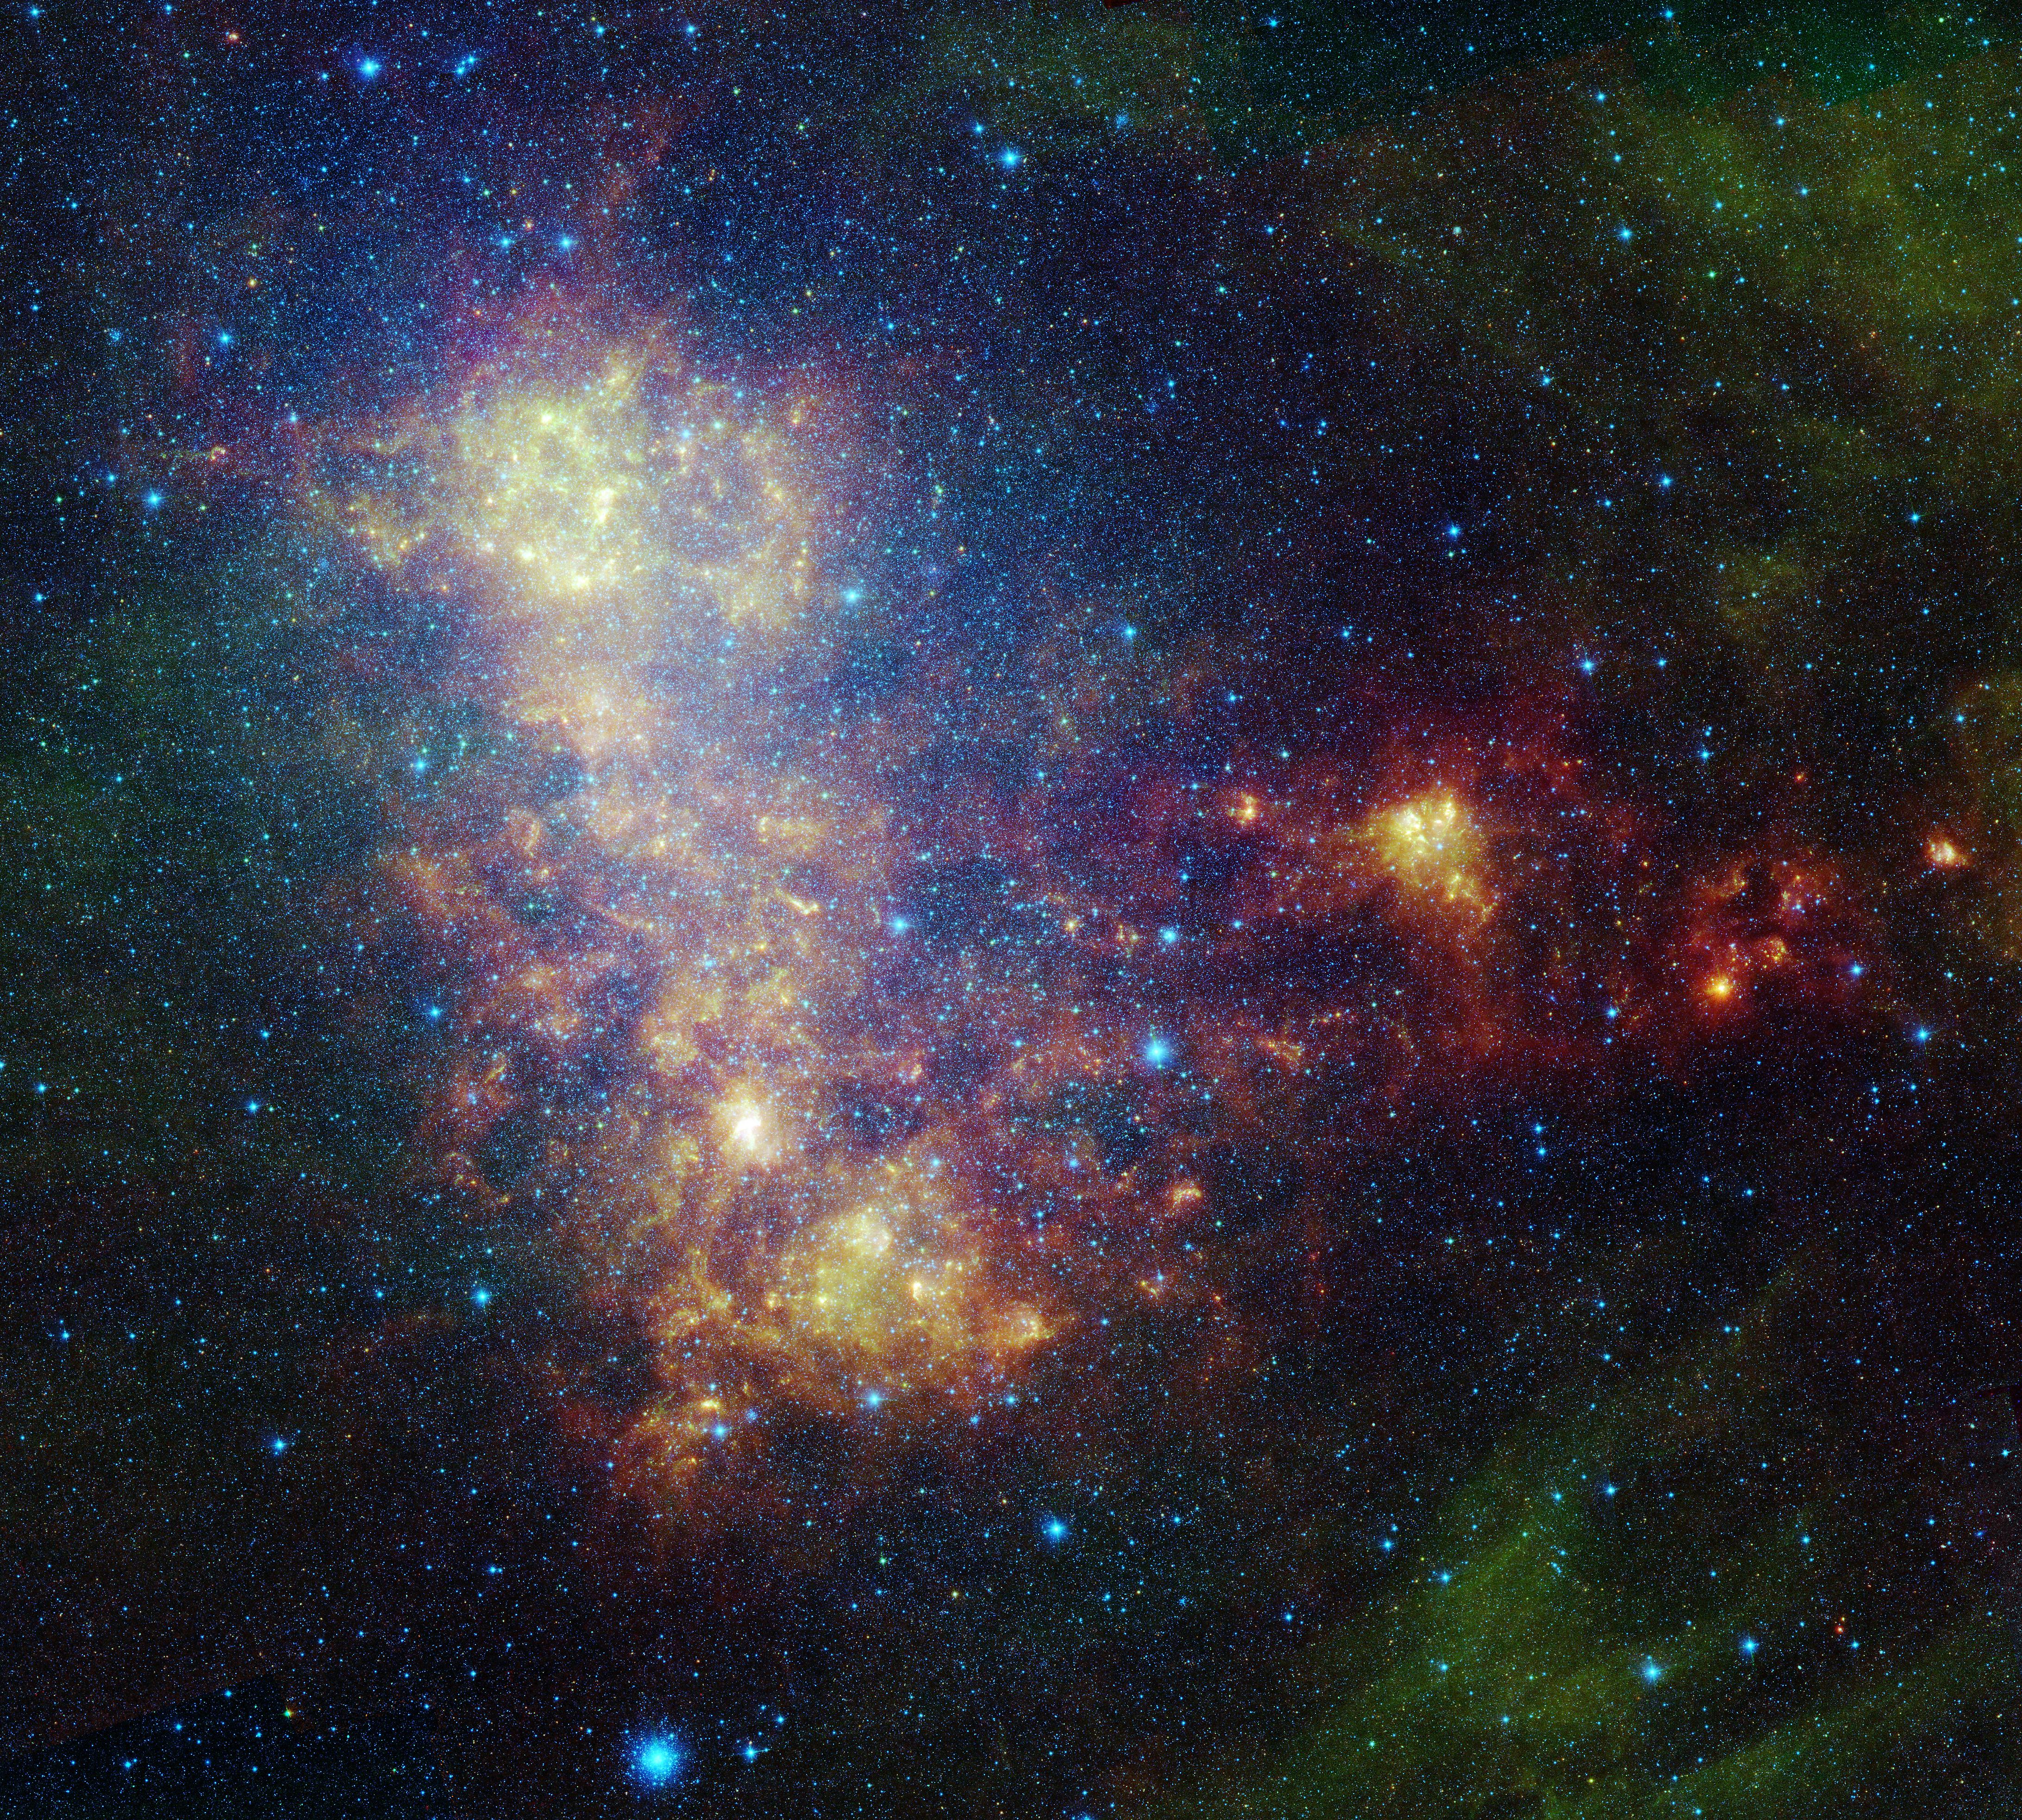 Infrared portrait revealing the stars and dust of the Small Magellanic Cloud.